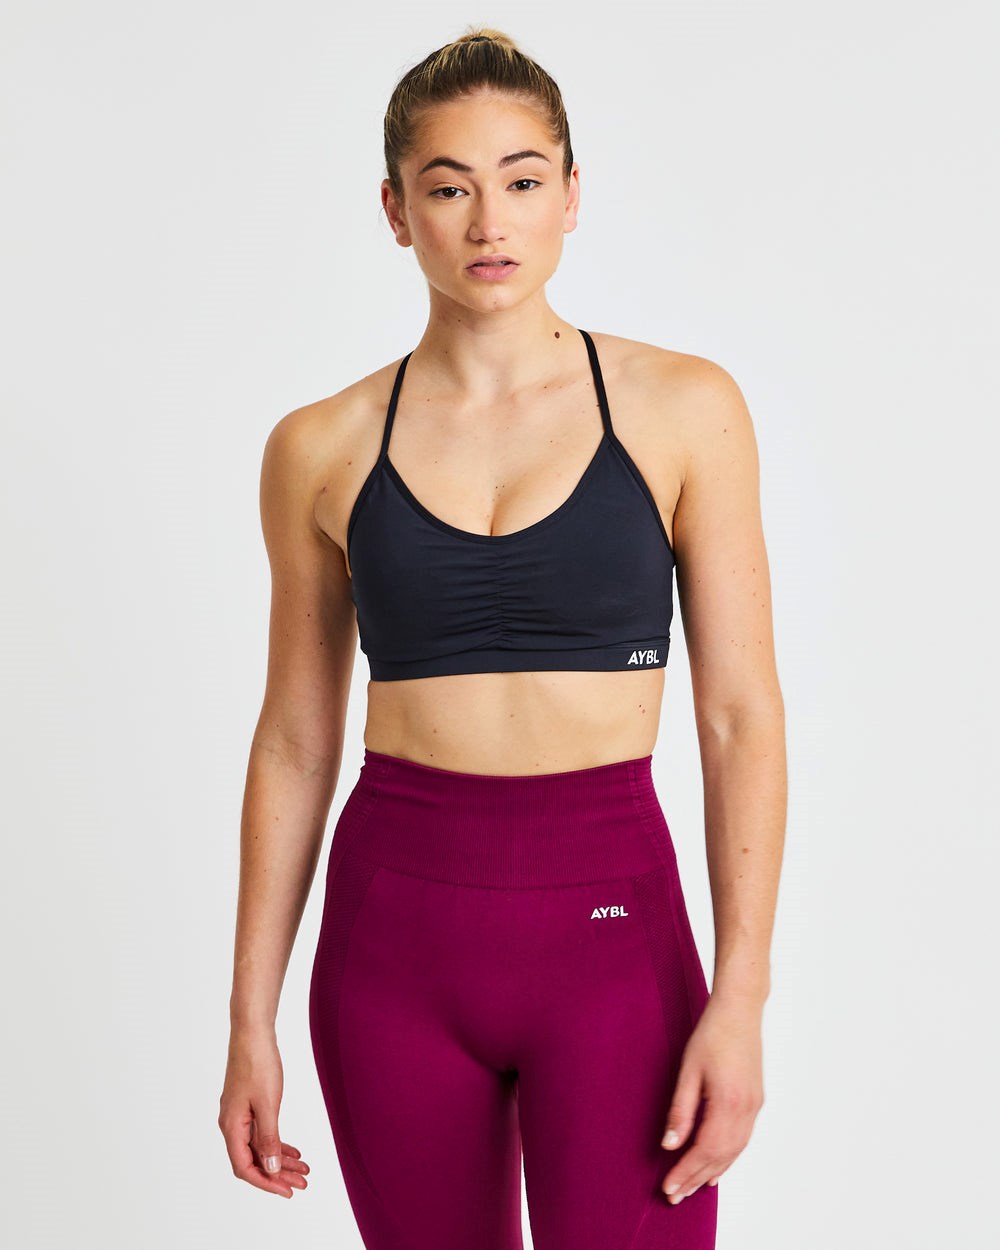 Cheap AYBL Essential Ruched Sports Bra For Sale - Womens Sports